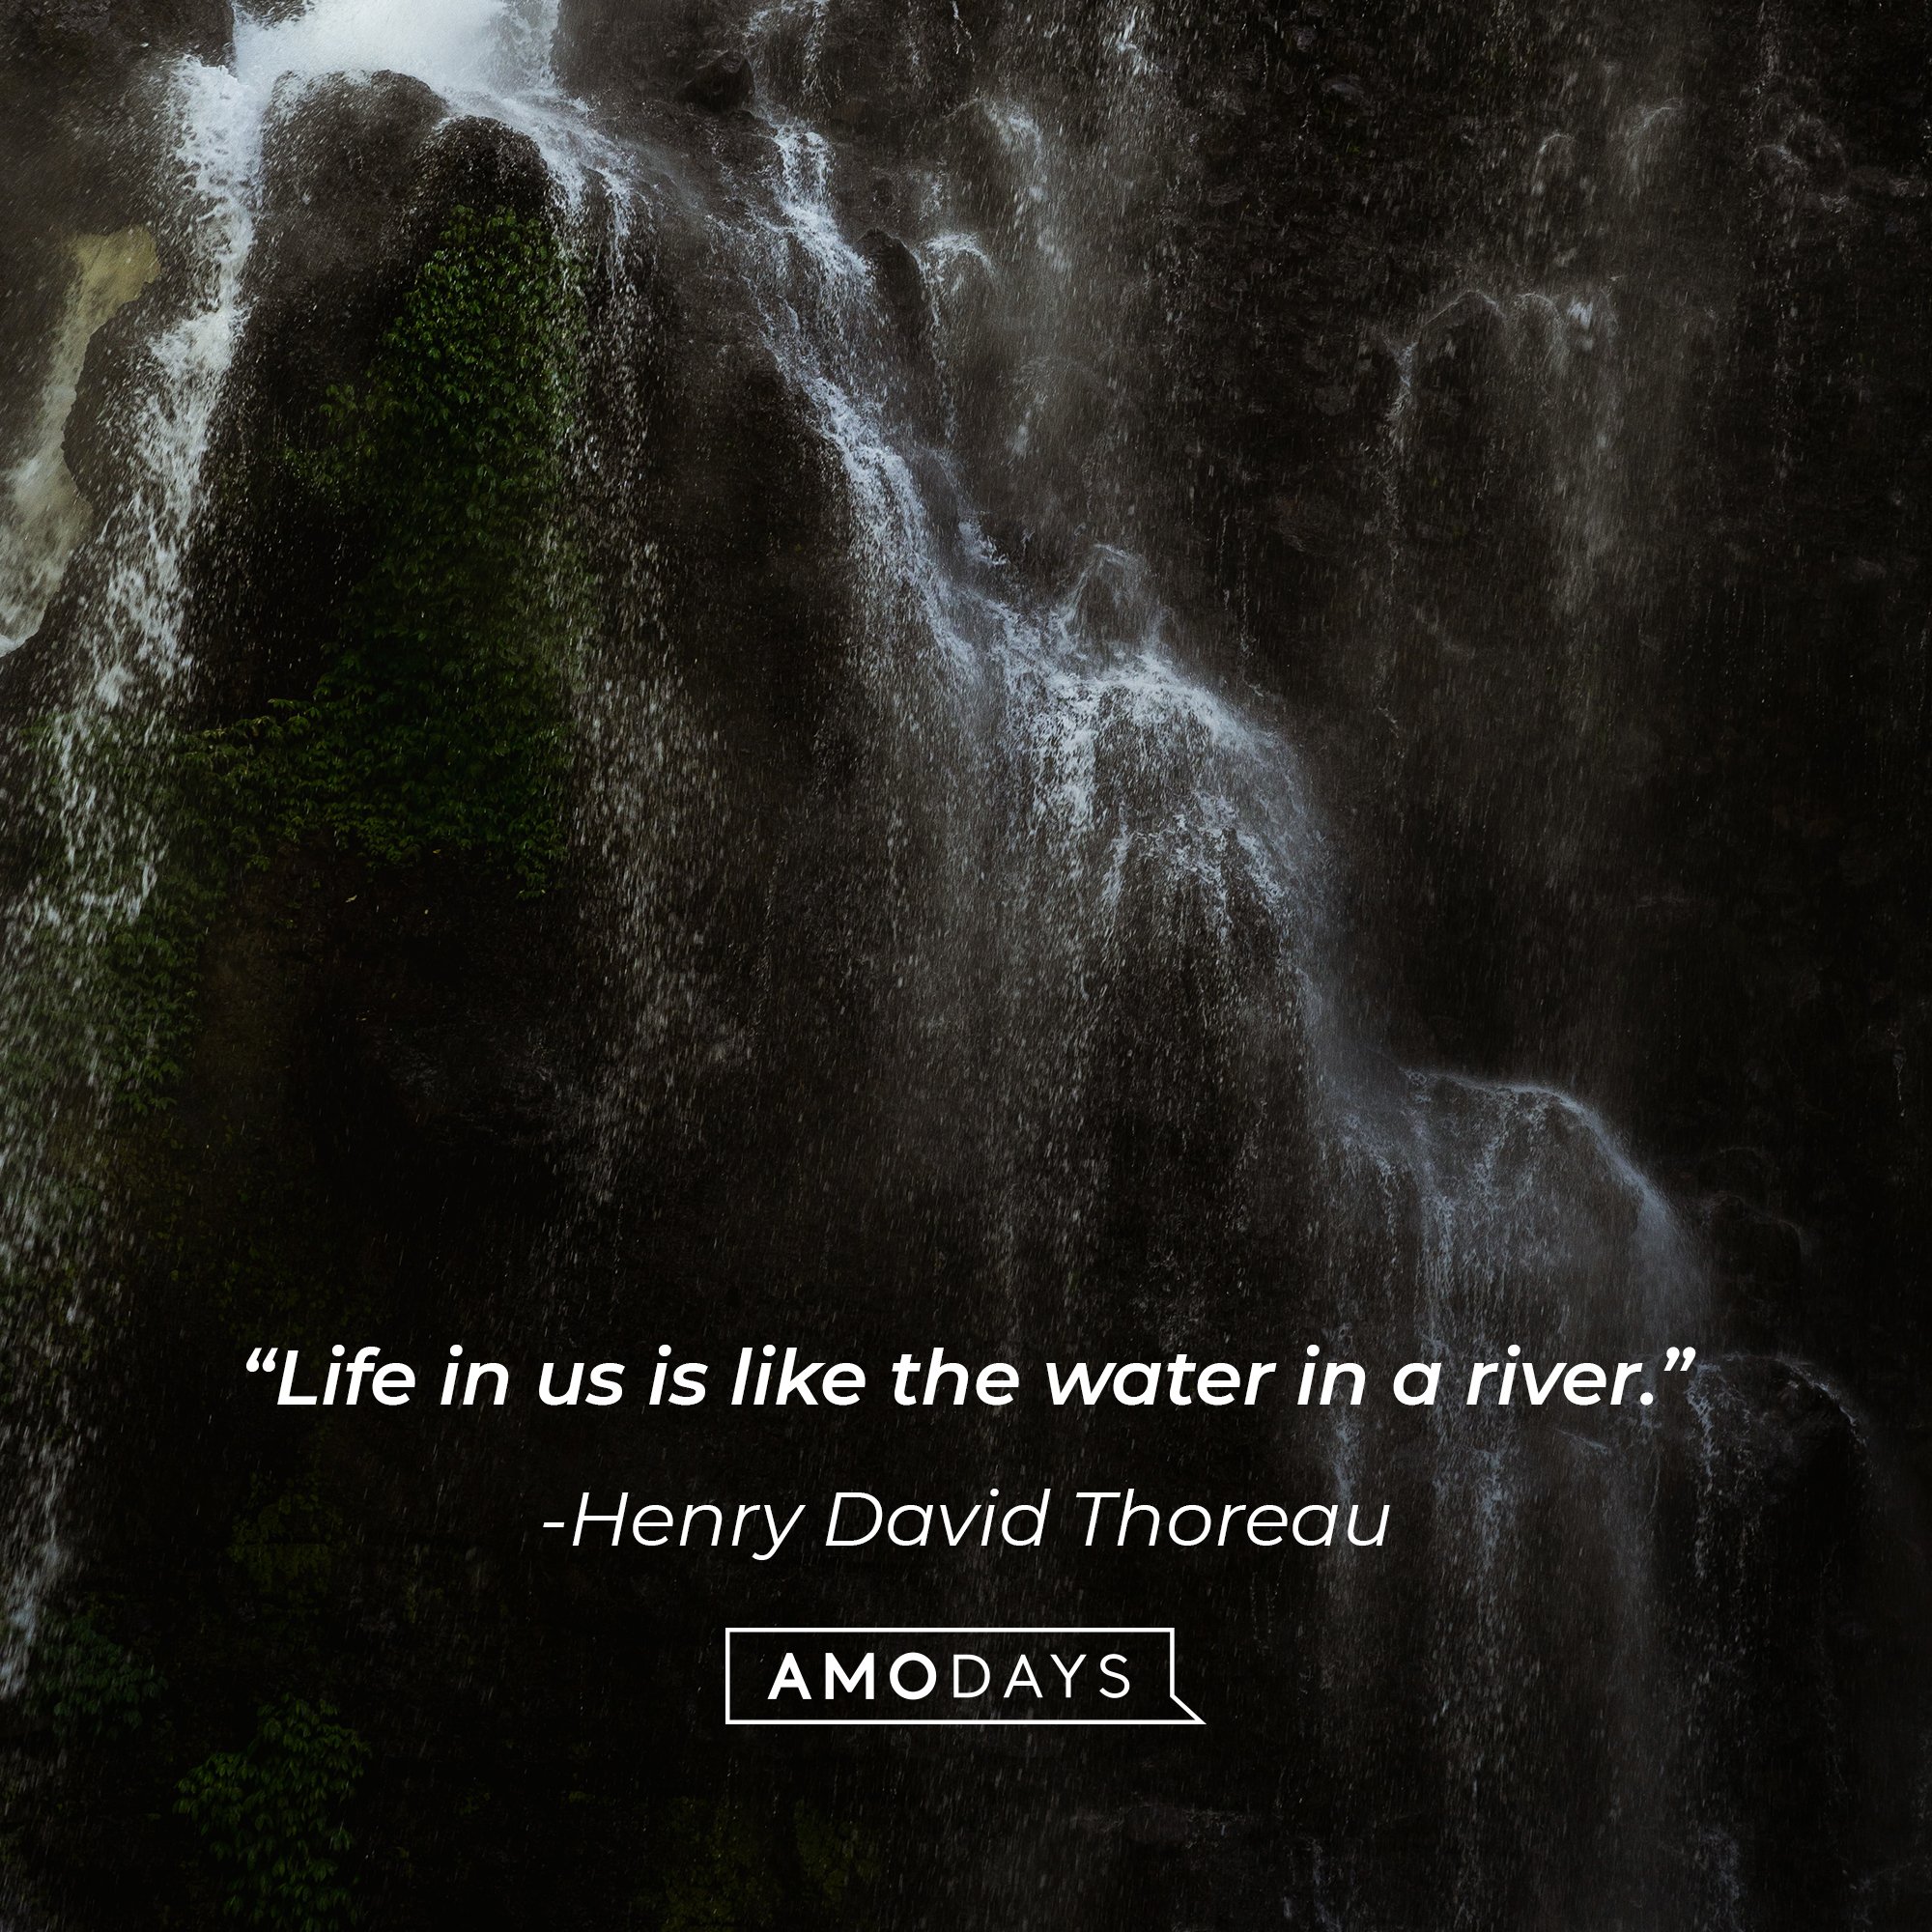 Henry David Thoreau’s quote: “Life in us is like the water in a river.” | Source: AmoDays